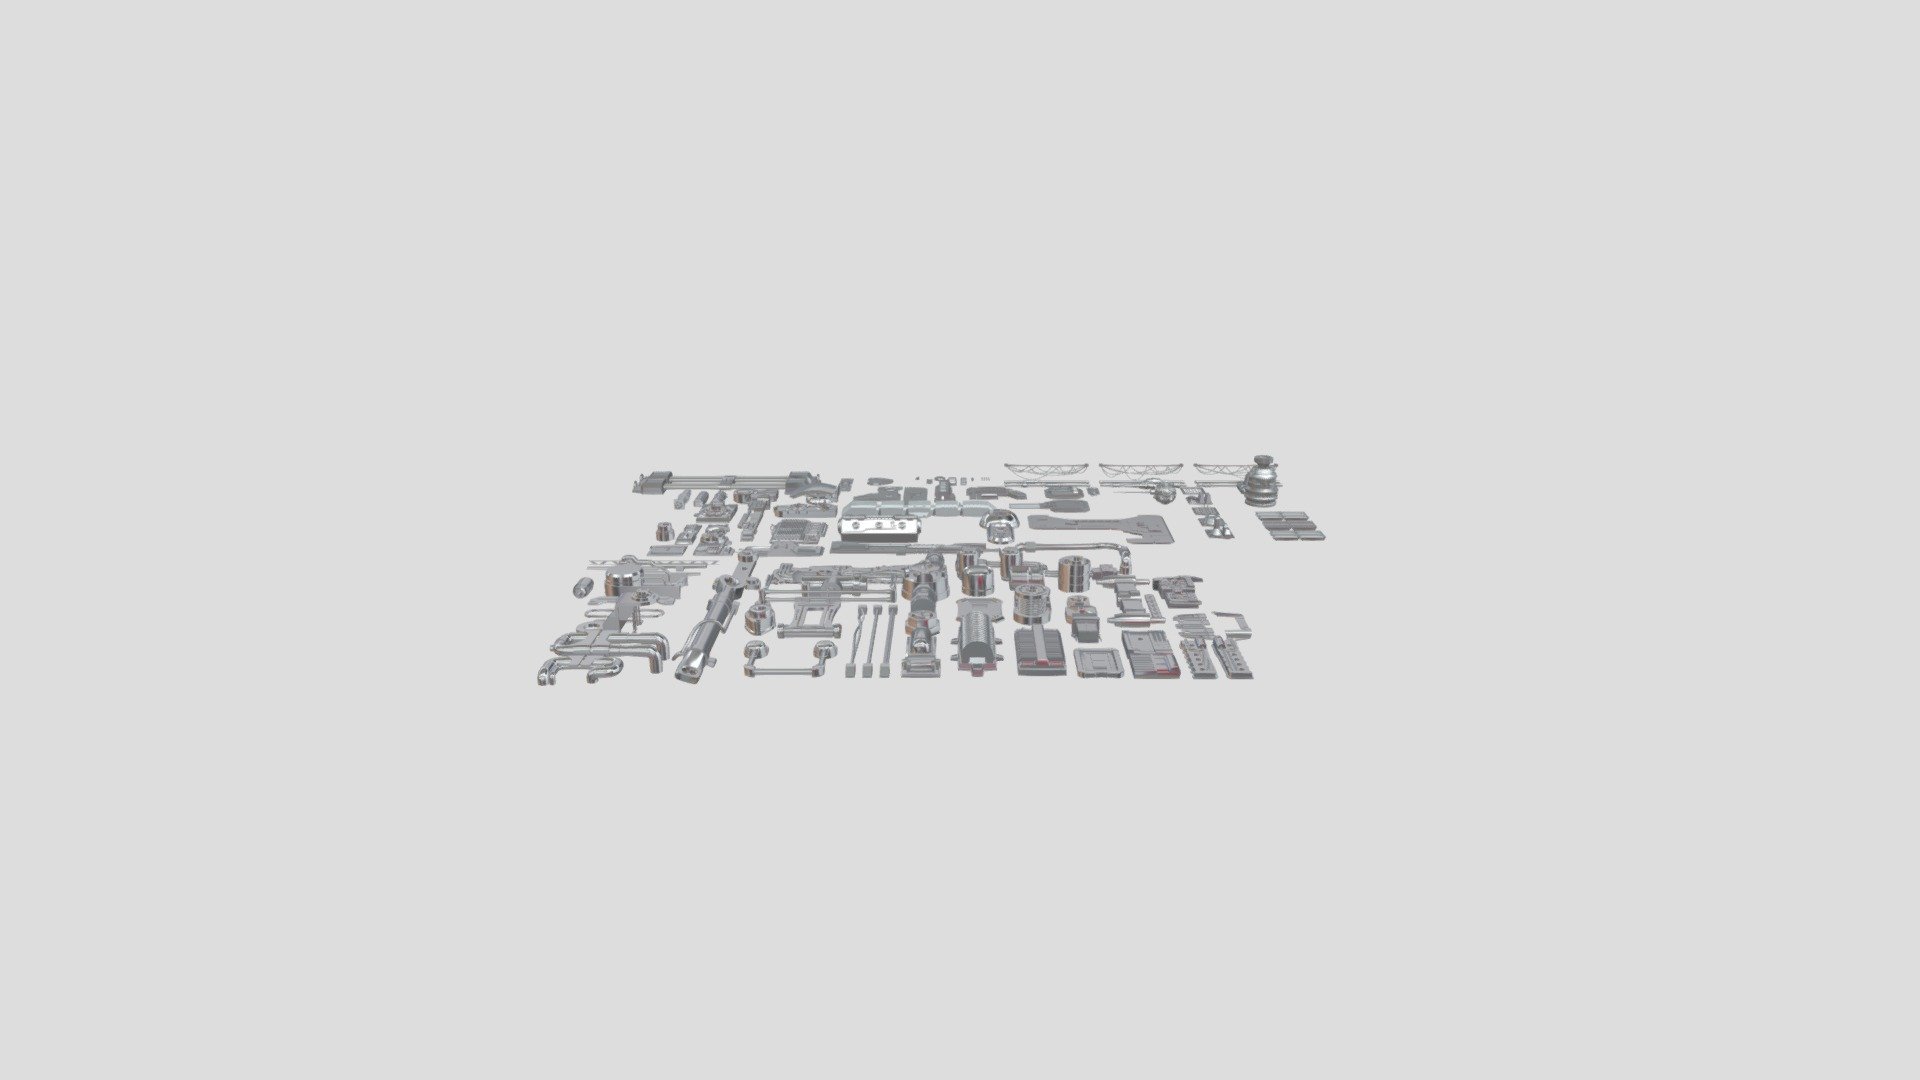 Here is my third Greeble Kit Bashing set. 

The geometry is fairly clean in parts, but can be cleaned up. Its for kit-bashing or concept renders and not meant to be production ready. However, if you'd like to make it production ready you can under a Freelance/Studio license.

I have not use subsurface on any of these meshes. Below is an example of using some of the pieces.

Not included
UV maps
Perfect topology
Polycount optimization  

Jump over to Youtube.com/markom3d to see some of these assets in action. 

You are able to download either in .blend or .FBX! - Scifi Kitbashing Set 3 - Buy Royalty Free 3D model by markom3d 3d model